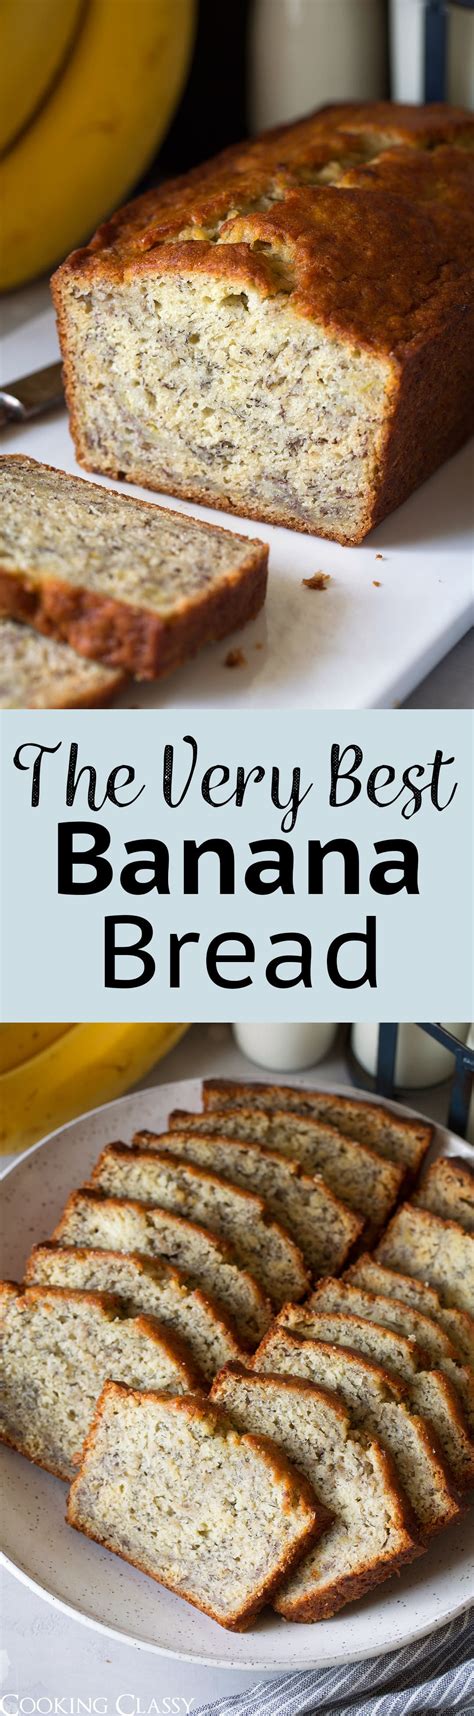 You read it right, formulating the best banana bread recipe has been an. Banana Bread Recipe {with How-to Video} - Cooking Classy